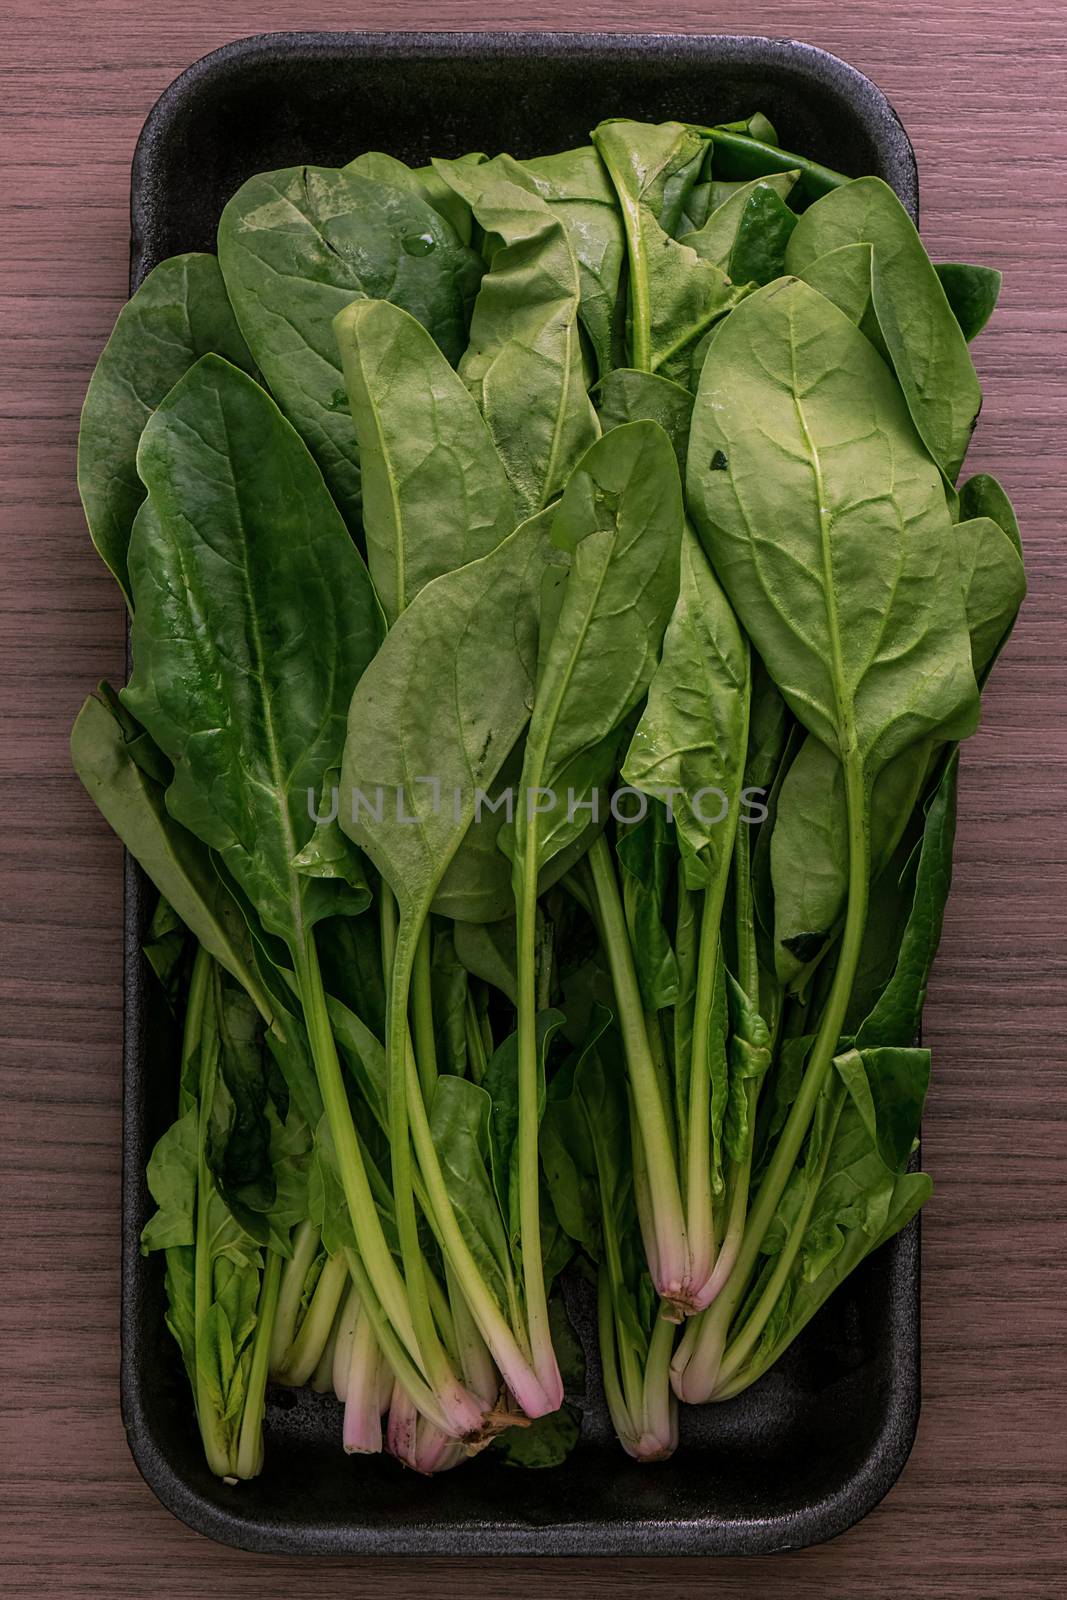 Some leafs of fresh green spinach over wood